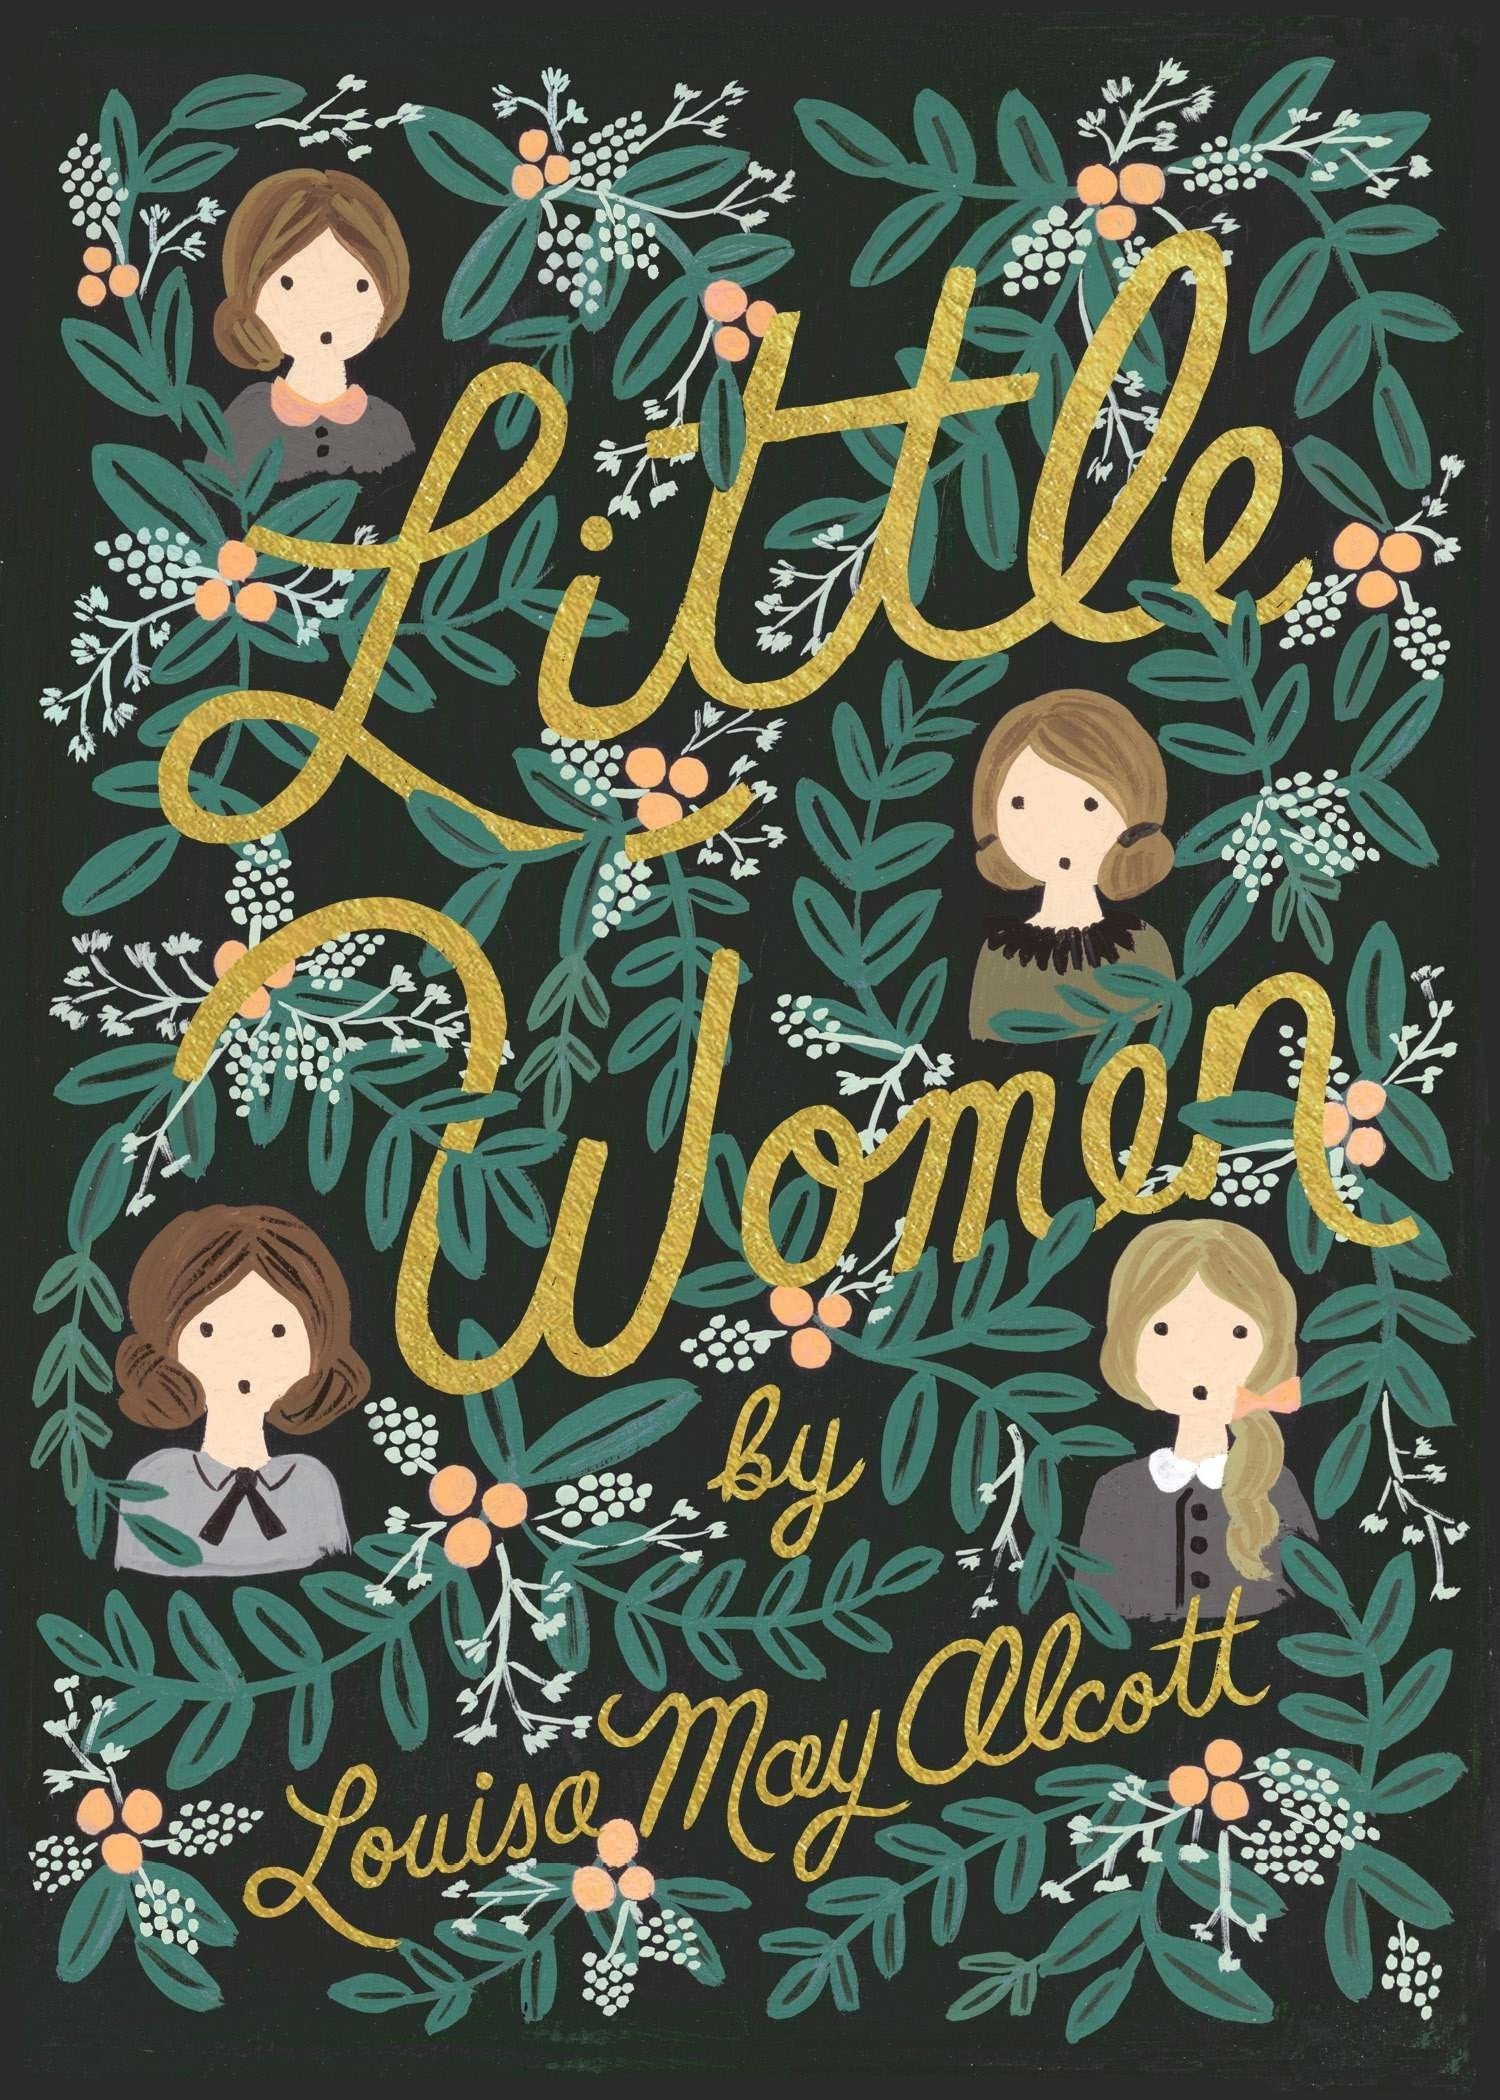 The cover of &quot;Little Women&quot; by Louisa May Alcott.